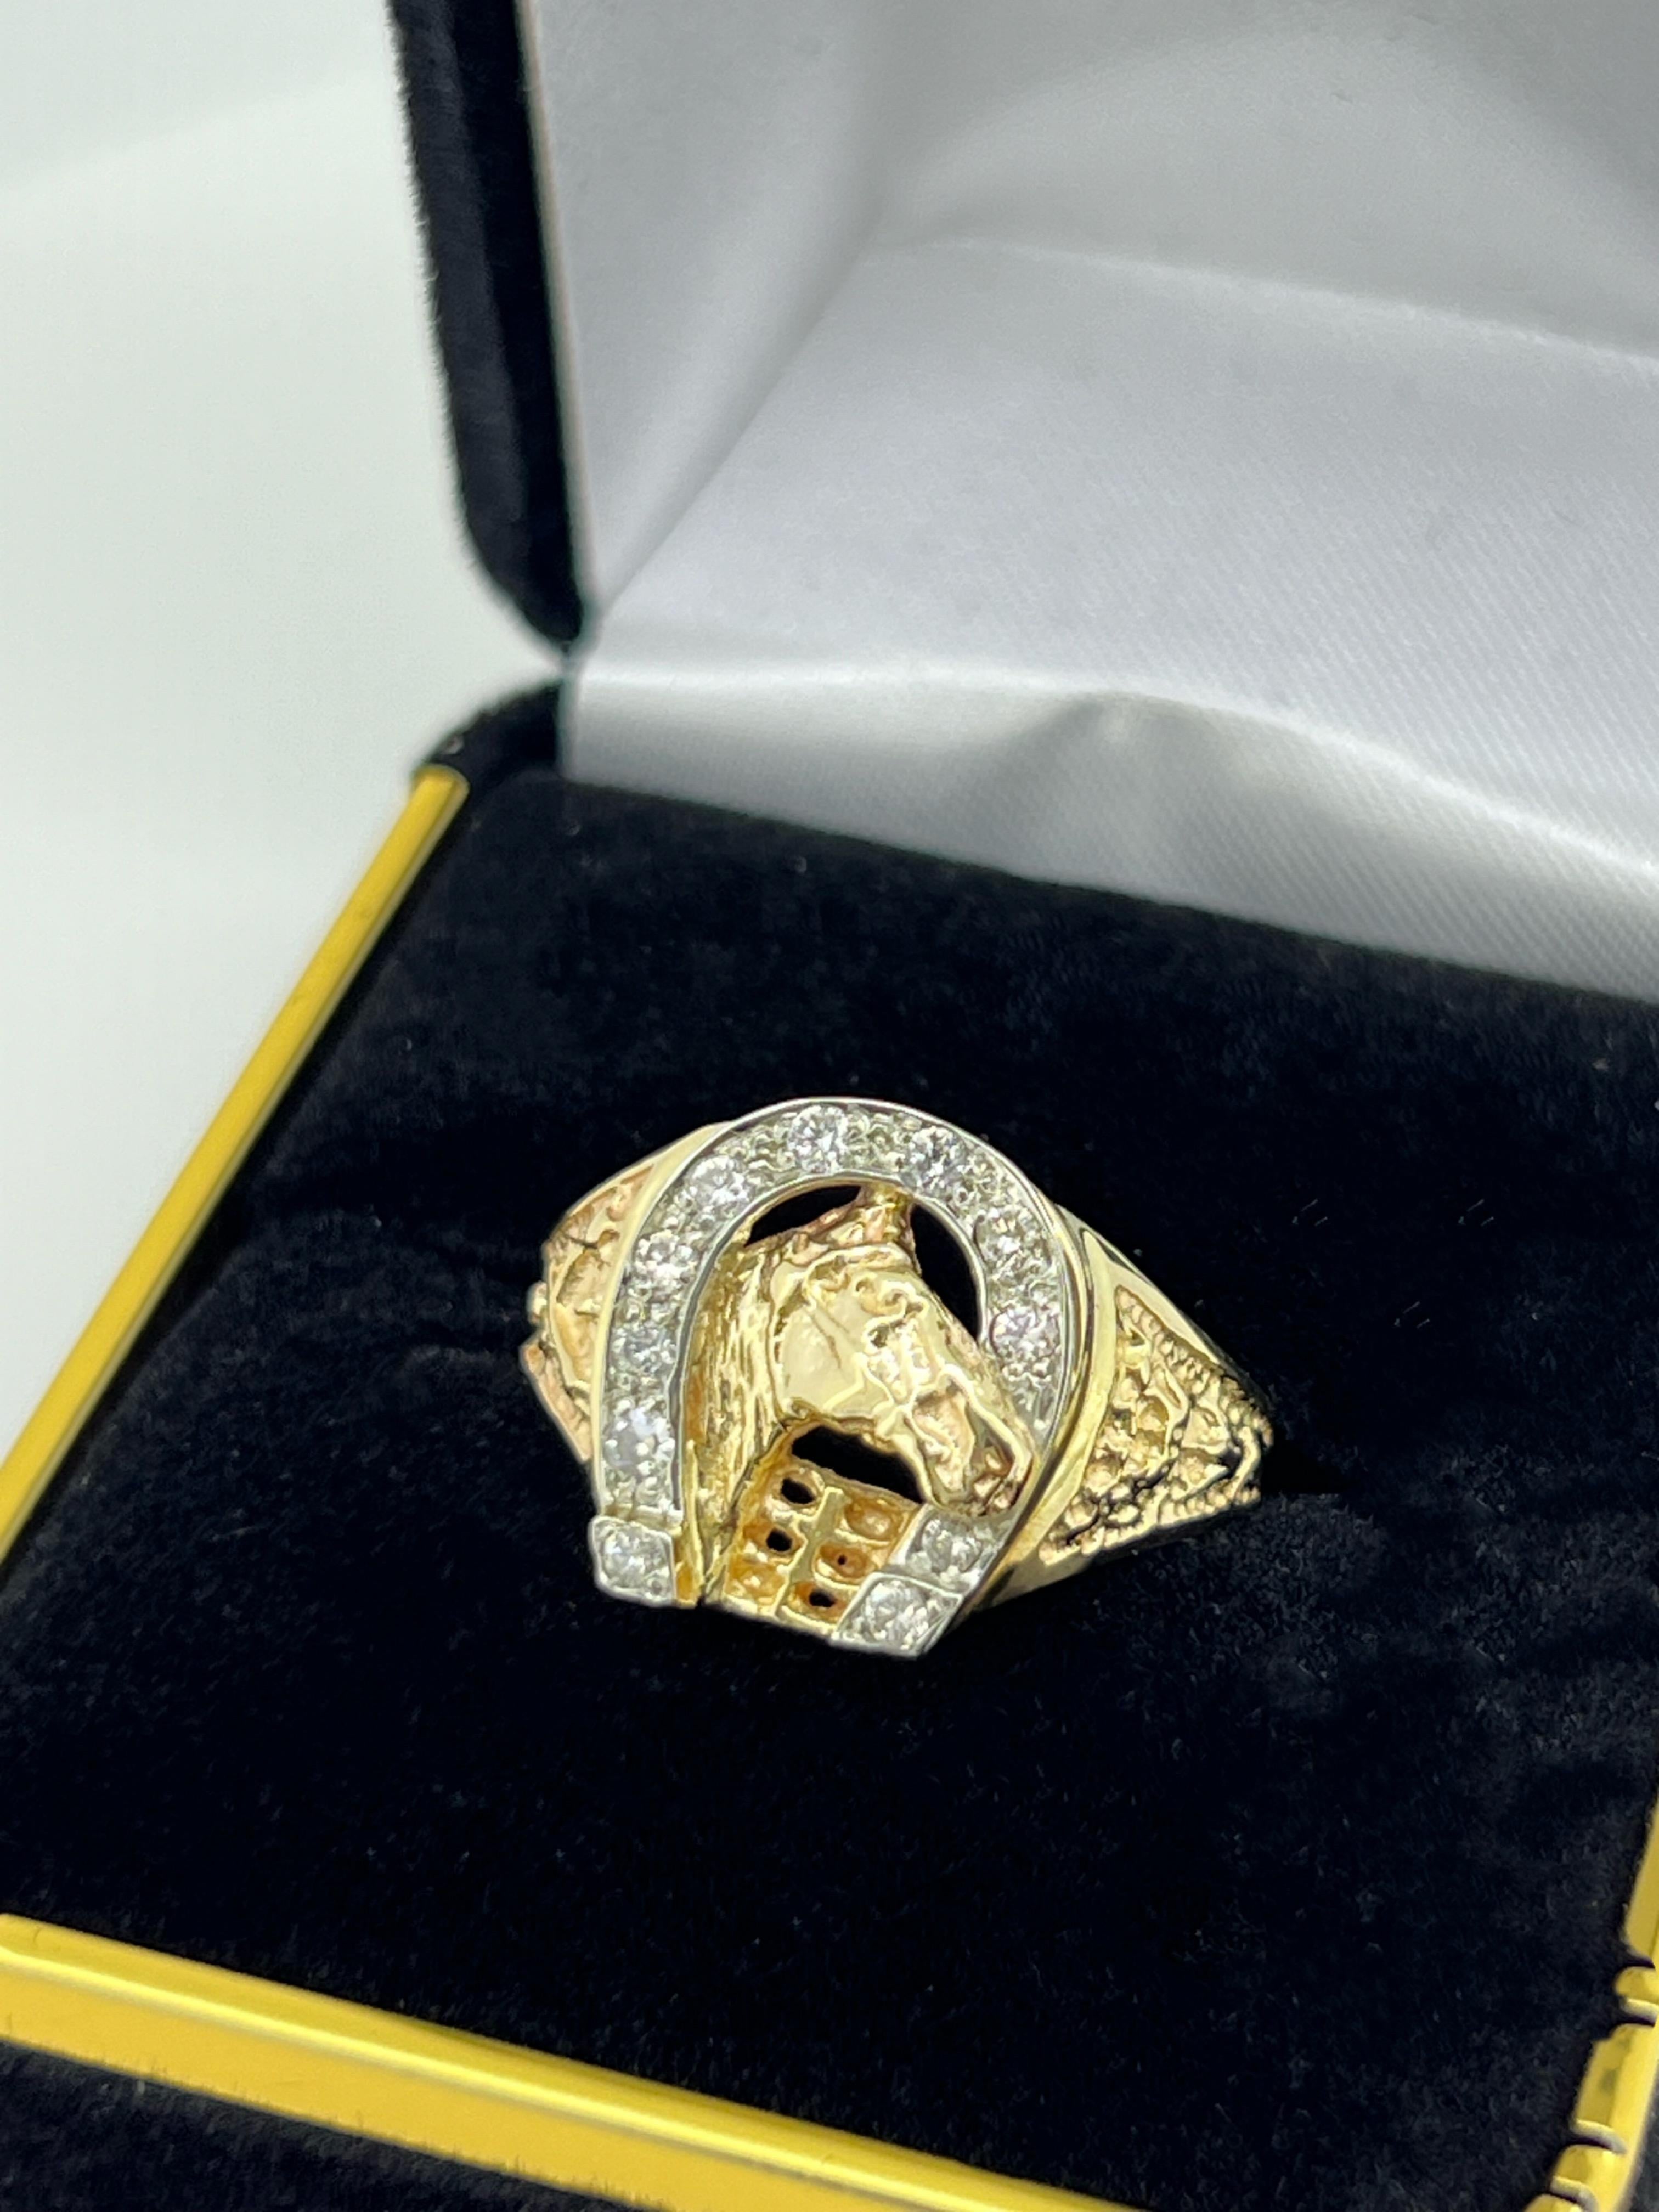 Of an exquisite design, 
which is believed to bring good luck 
this unisex ring is of horseshoe motif, 
crafted in 14K Yellow Gold 

The piece features a horse, incredibly detailed,
within a horseshoe, 
embellished with 
round sparkling diamonds of